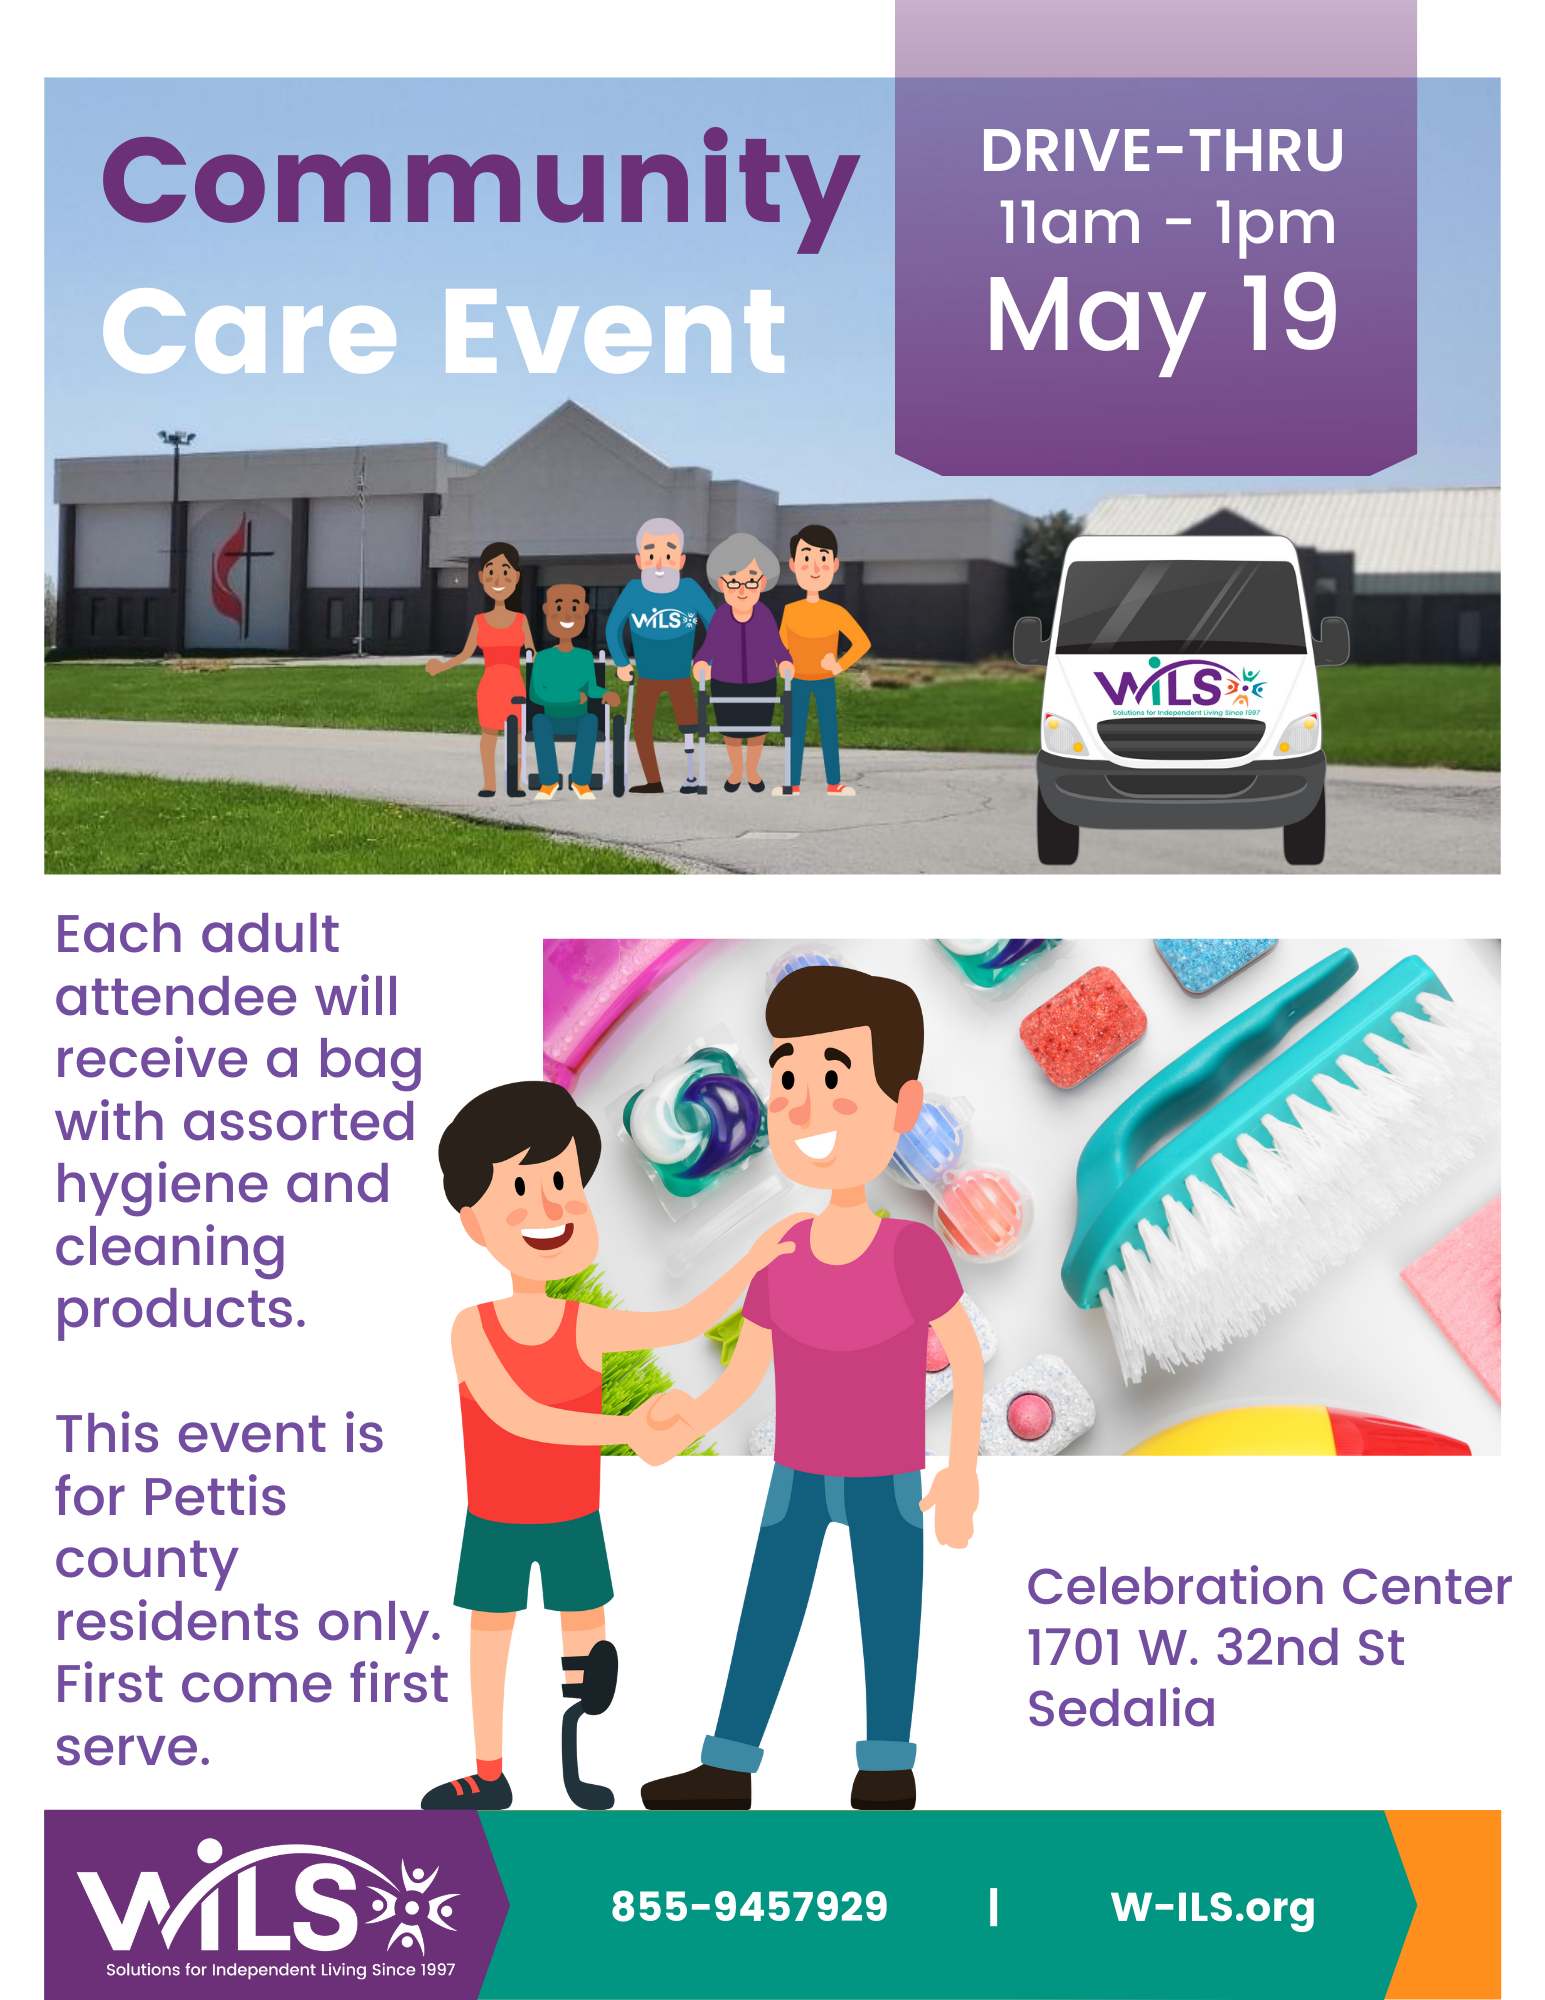 WILS is hosting a Community Care drive-thru event in Pettis county.  Each adult attendee will receive a bag with assorted cleaning products and hygiene items.  This event is for Pettis county residents only. First come first serve.